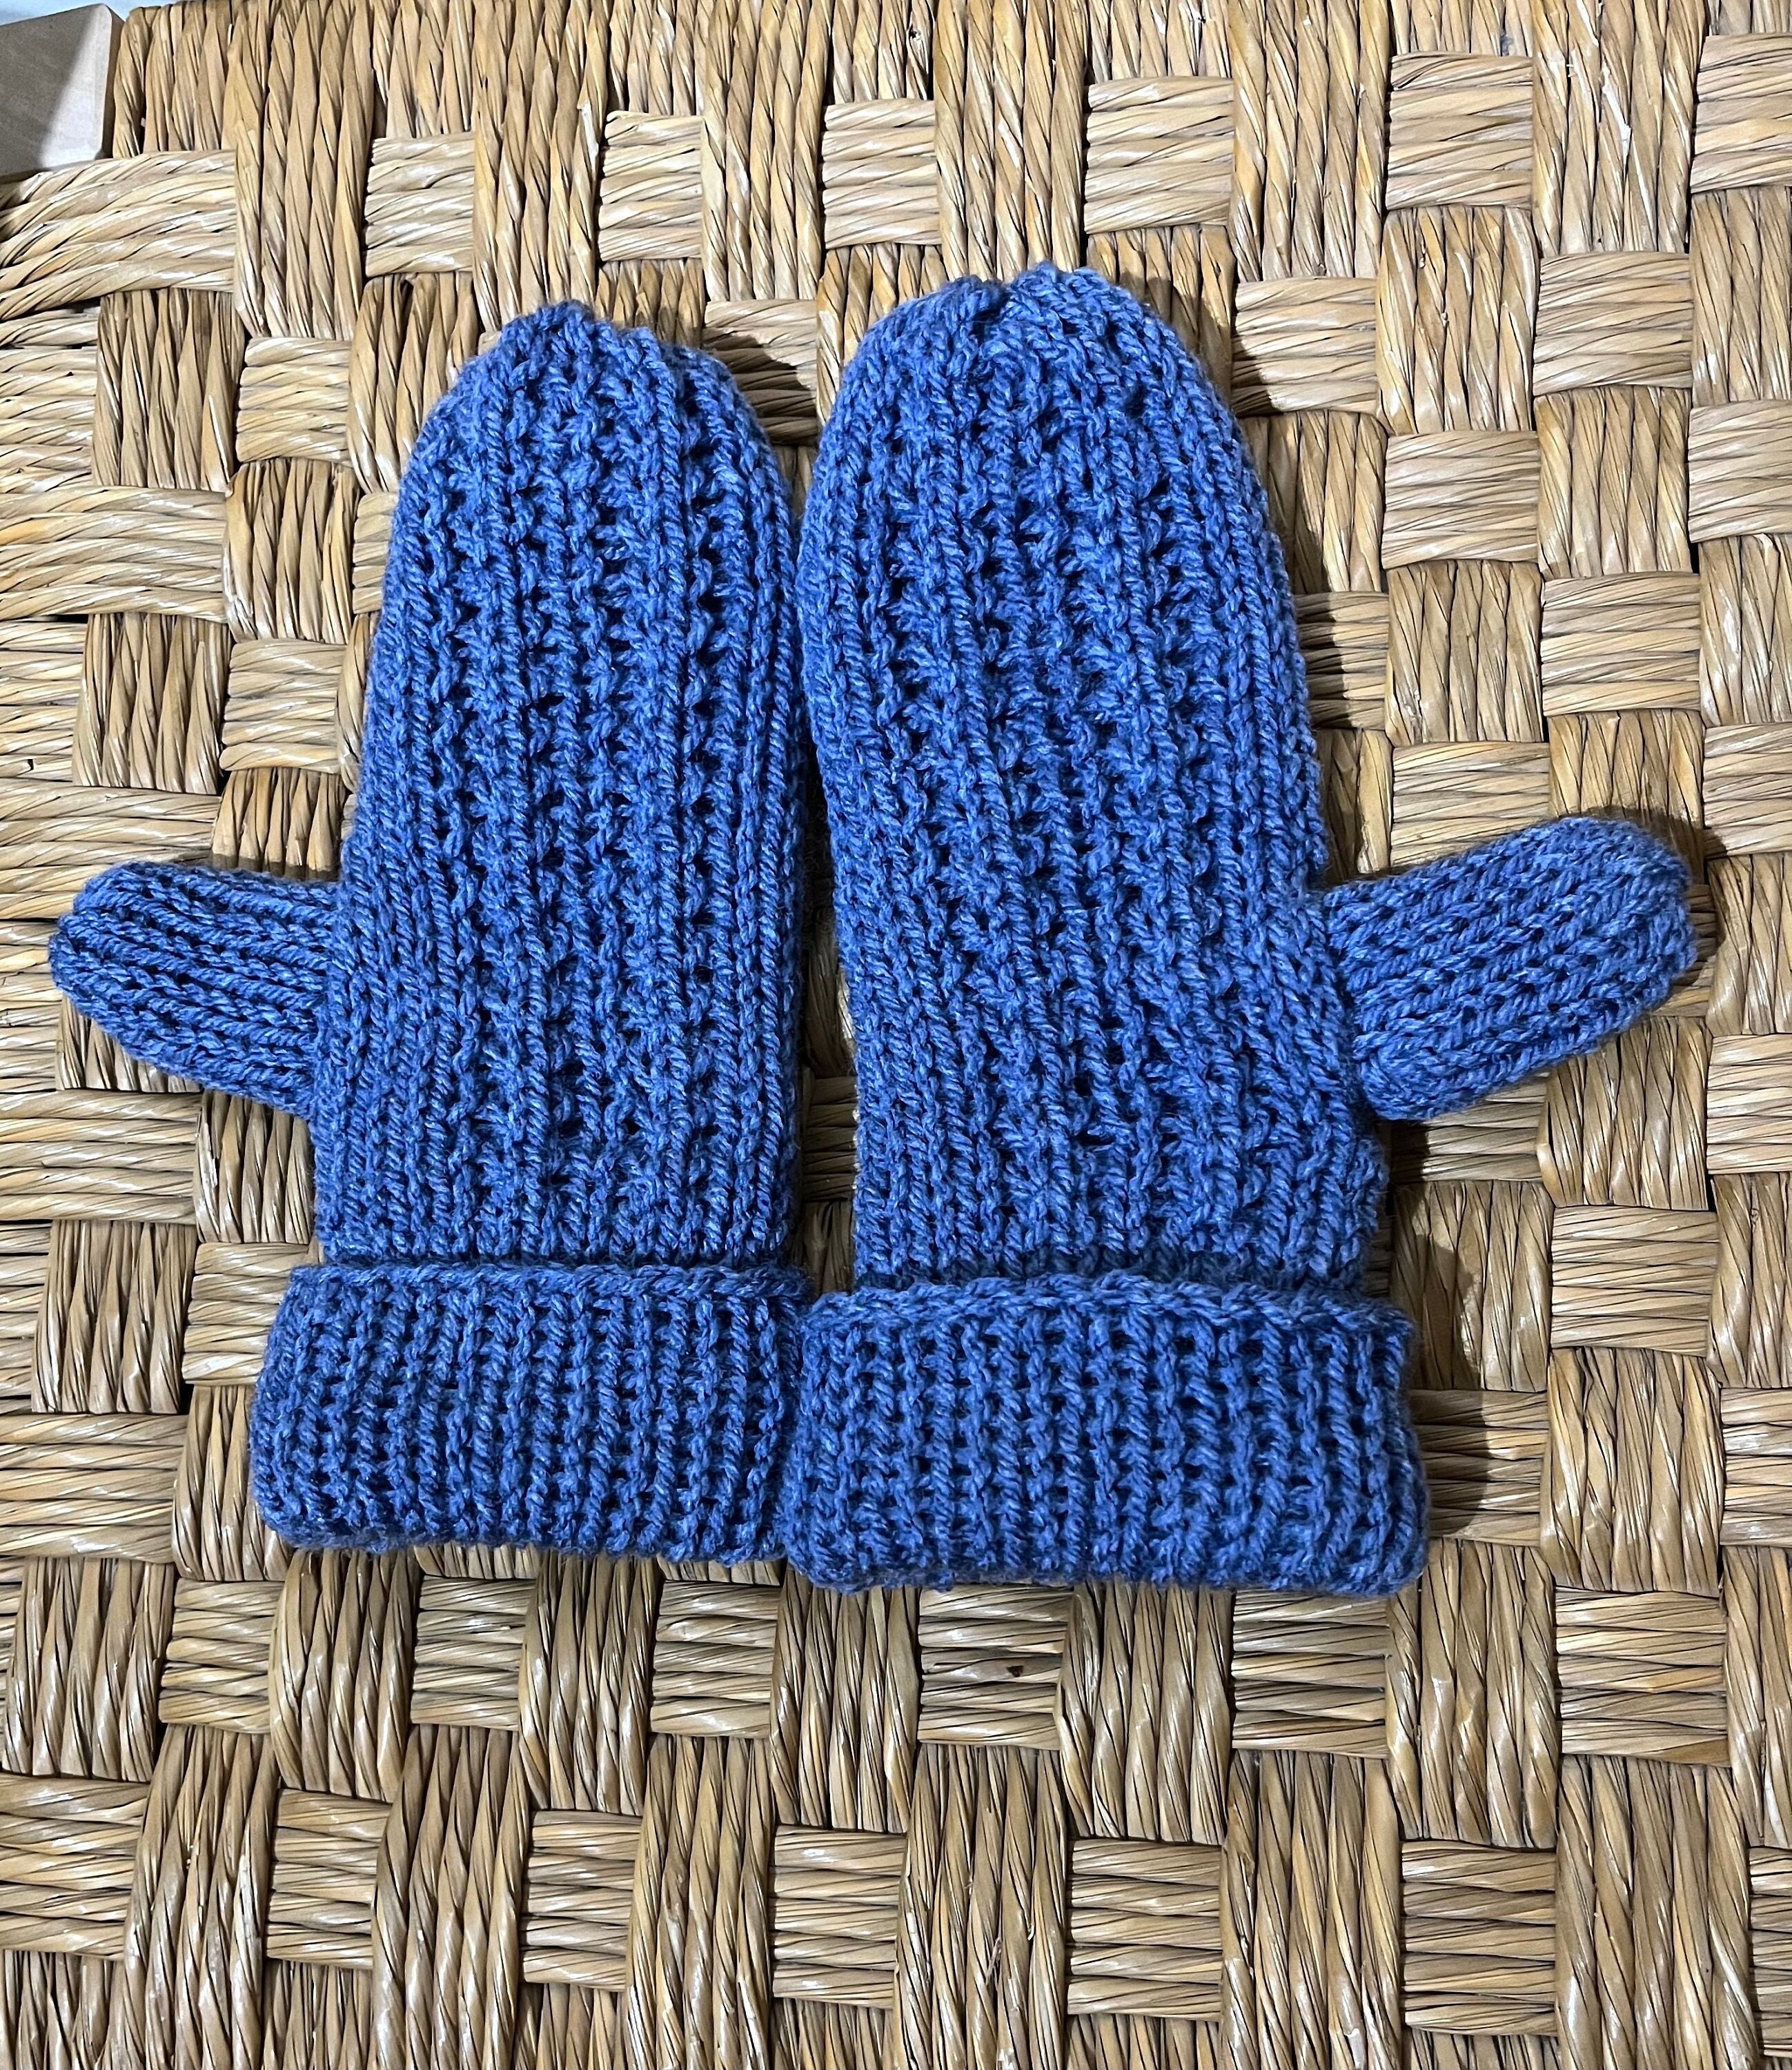 Ivyesque Fingerless Mitts Addi 22 Pin Pattern, Knitting Machine Pattern,  Read Item Description Fully Before Purchase 